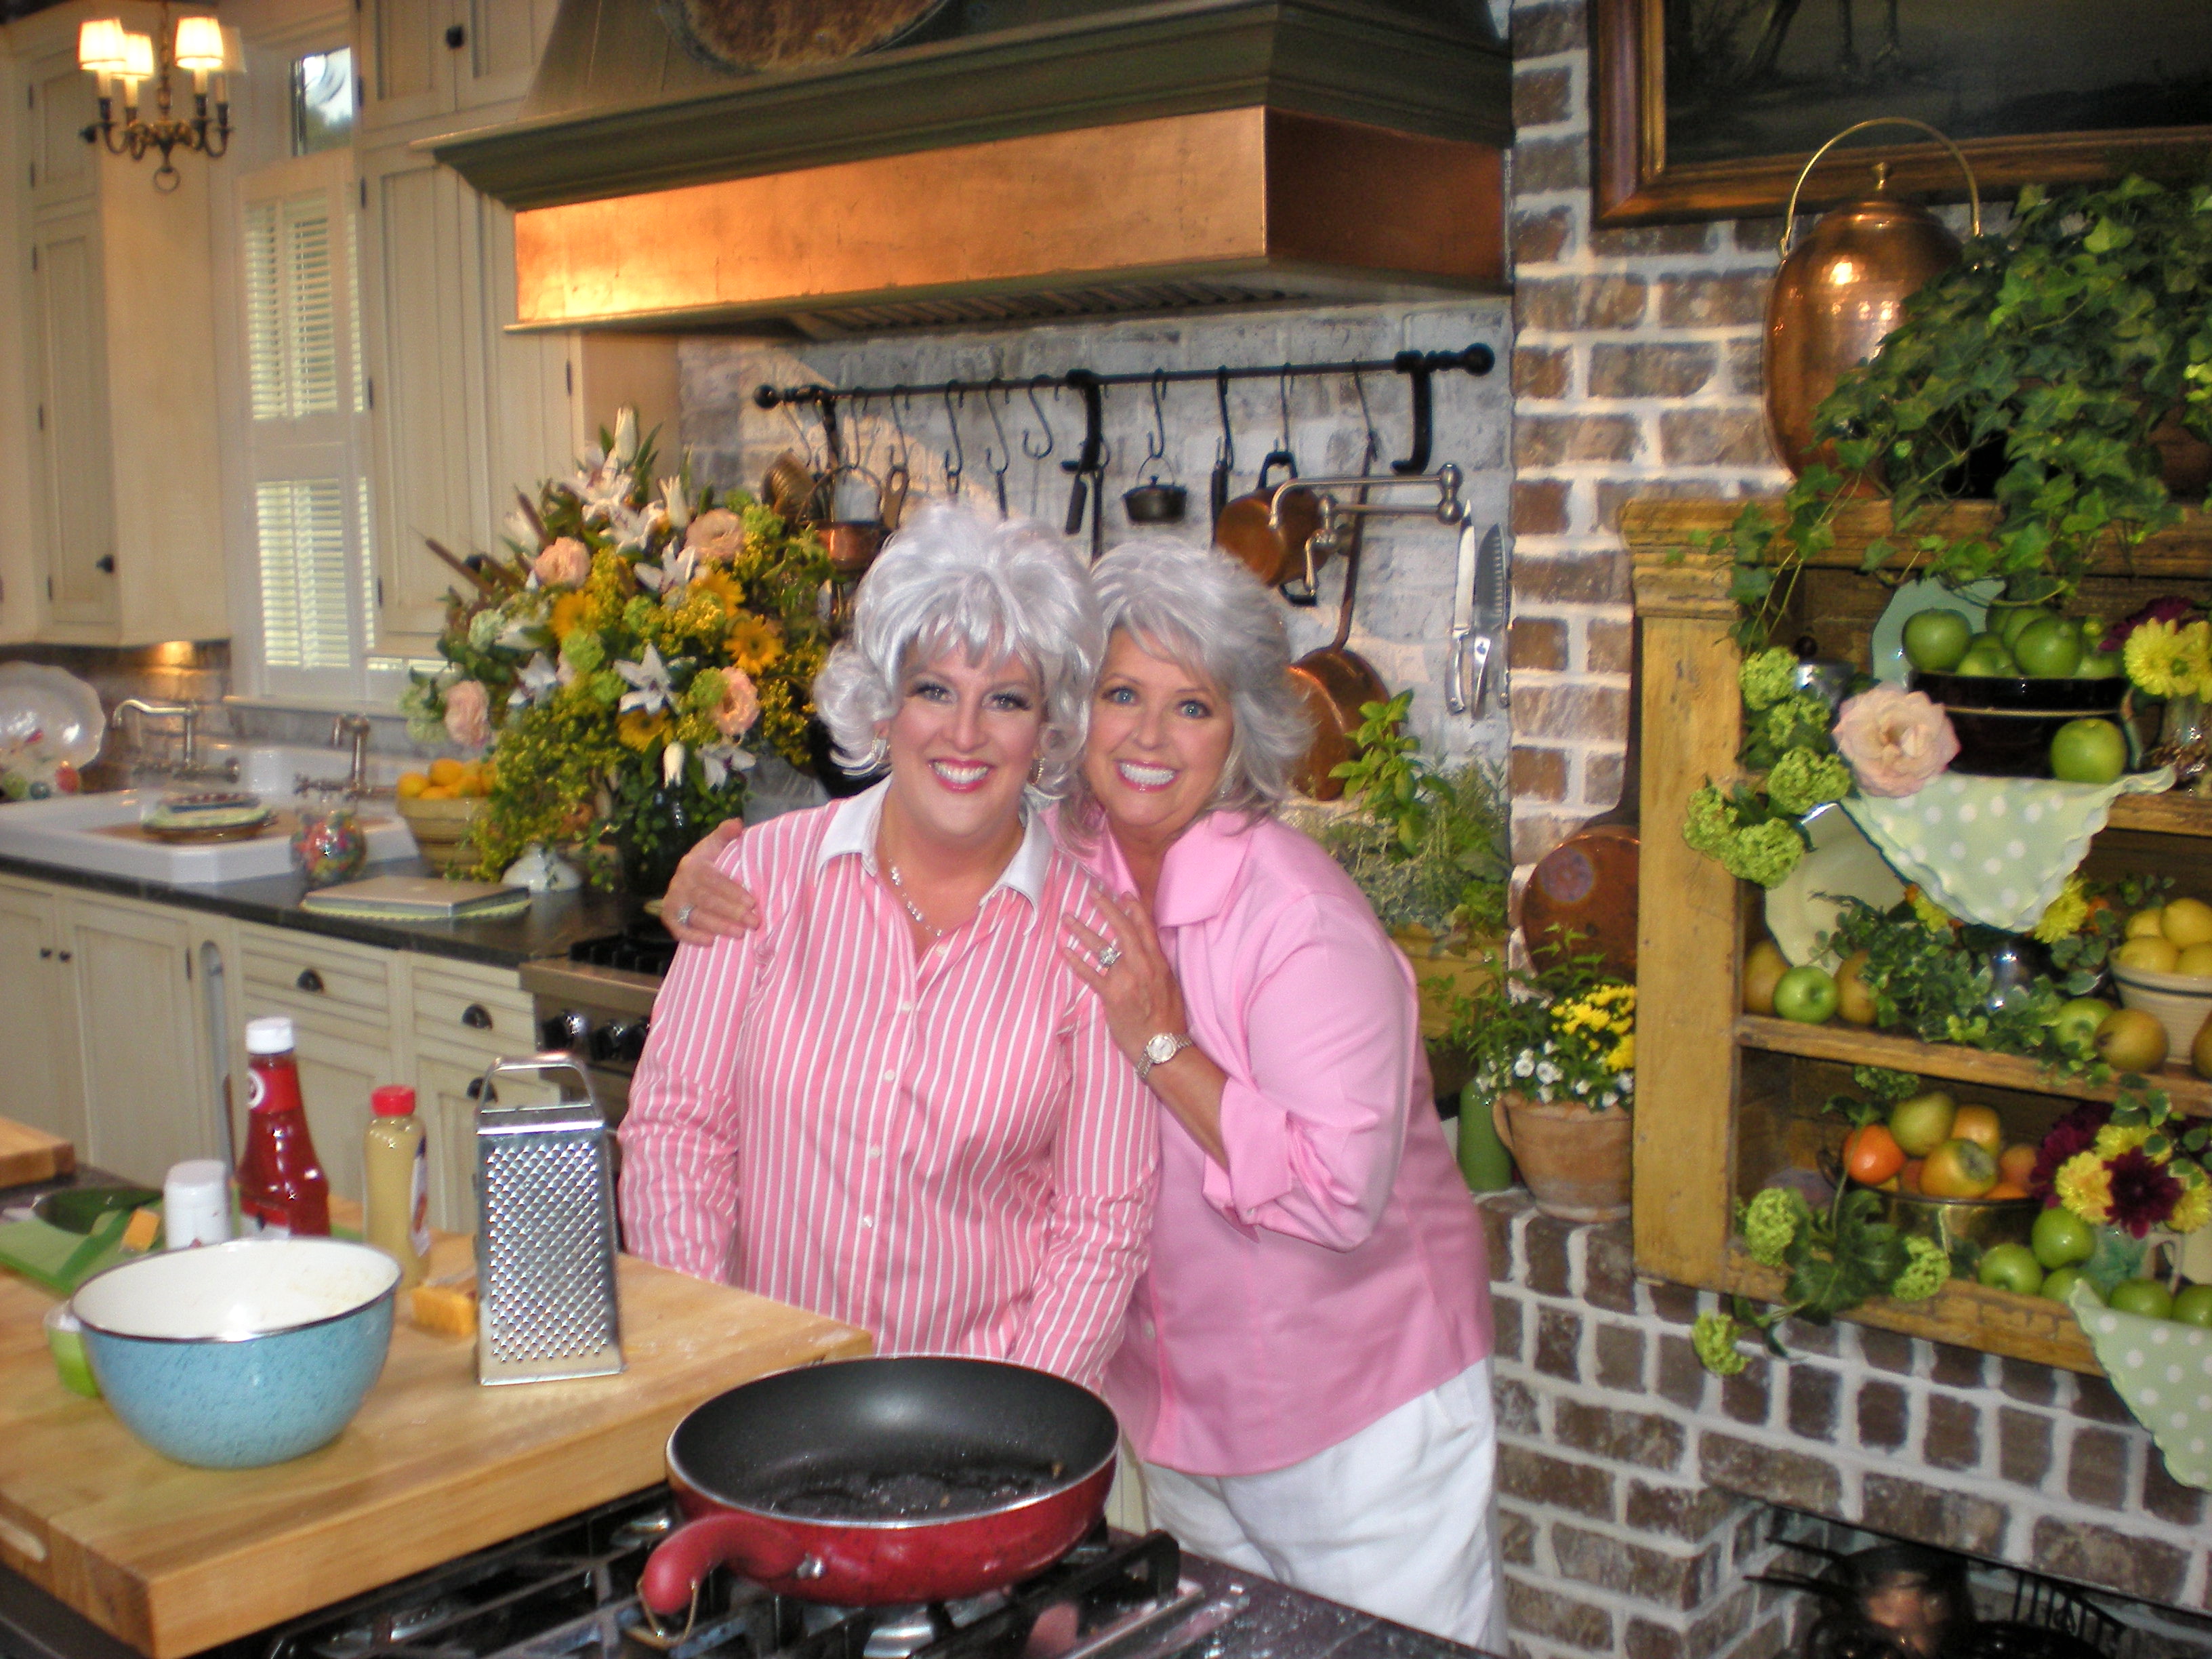 I Surprised Paula Deen with my impersonation of her and we Cooked up some great recipes on her show, 